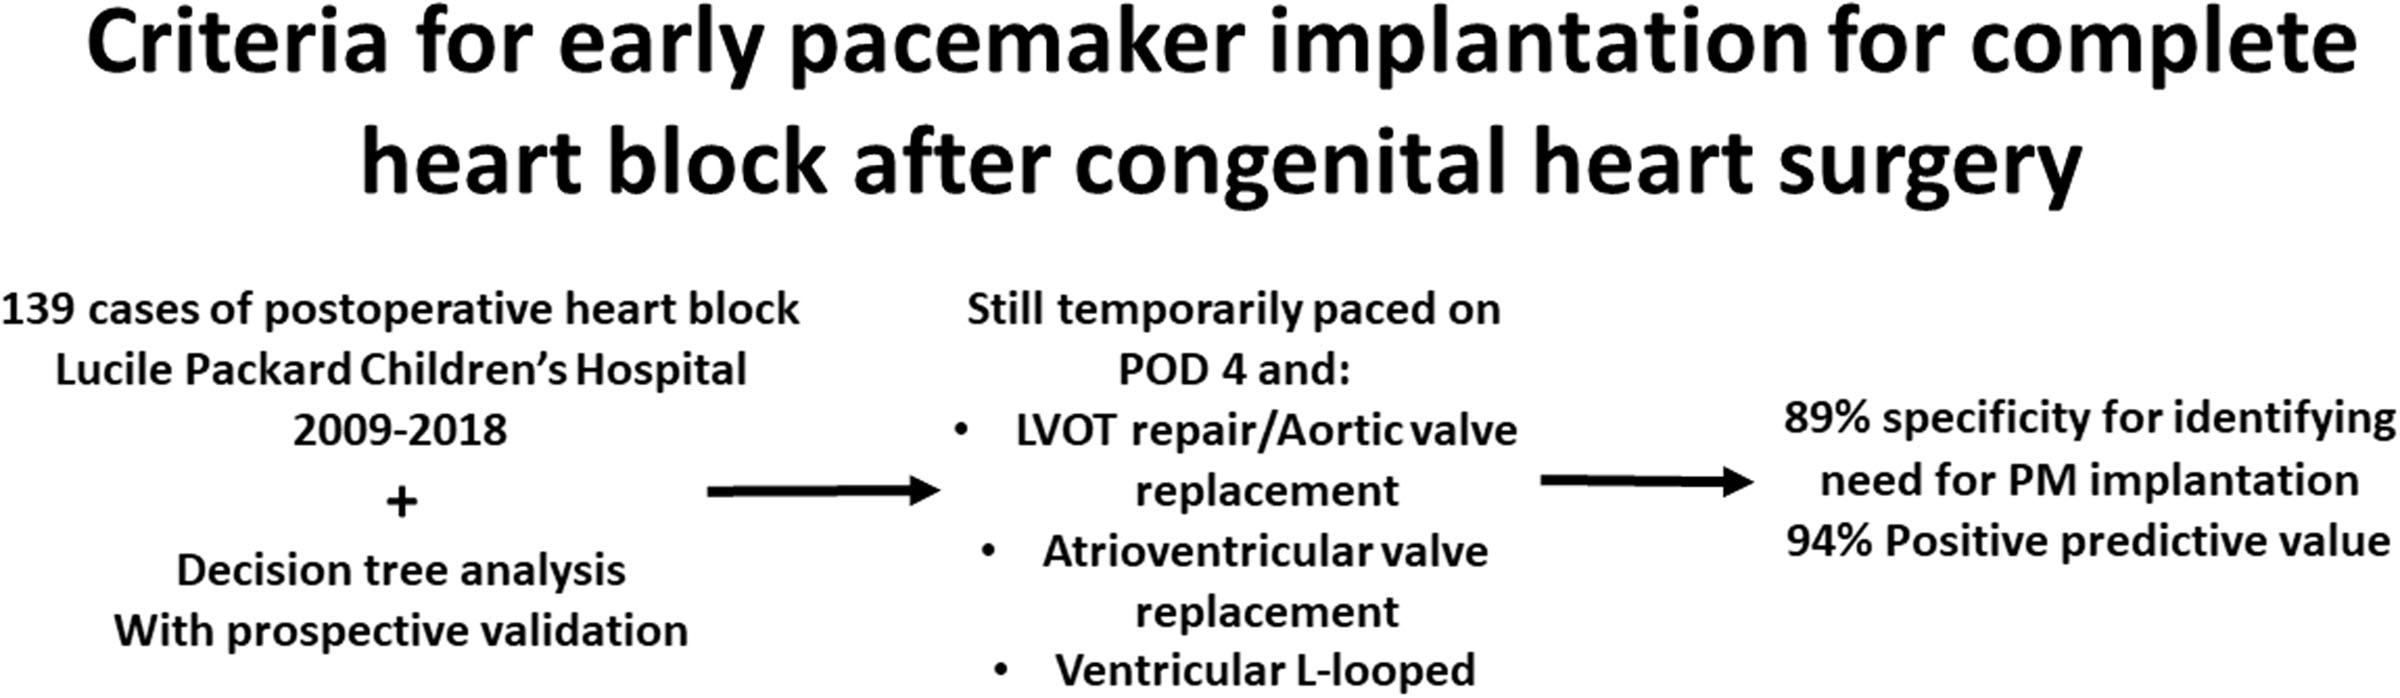 Criteria for Early Pacemaker Implantation in Patients With Postoperative Heart Block After Congenital Heart Surgery